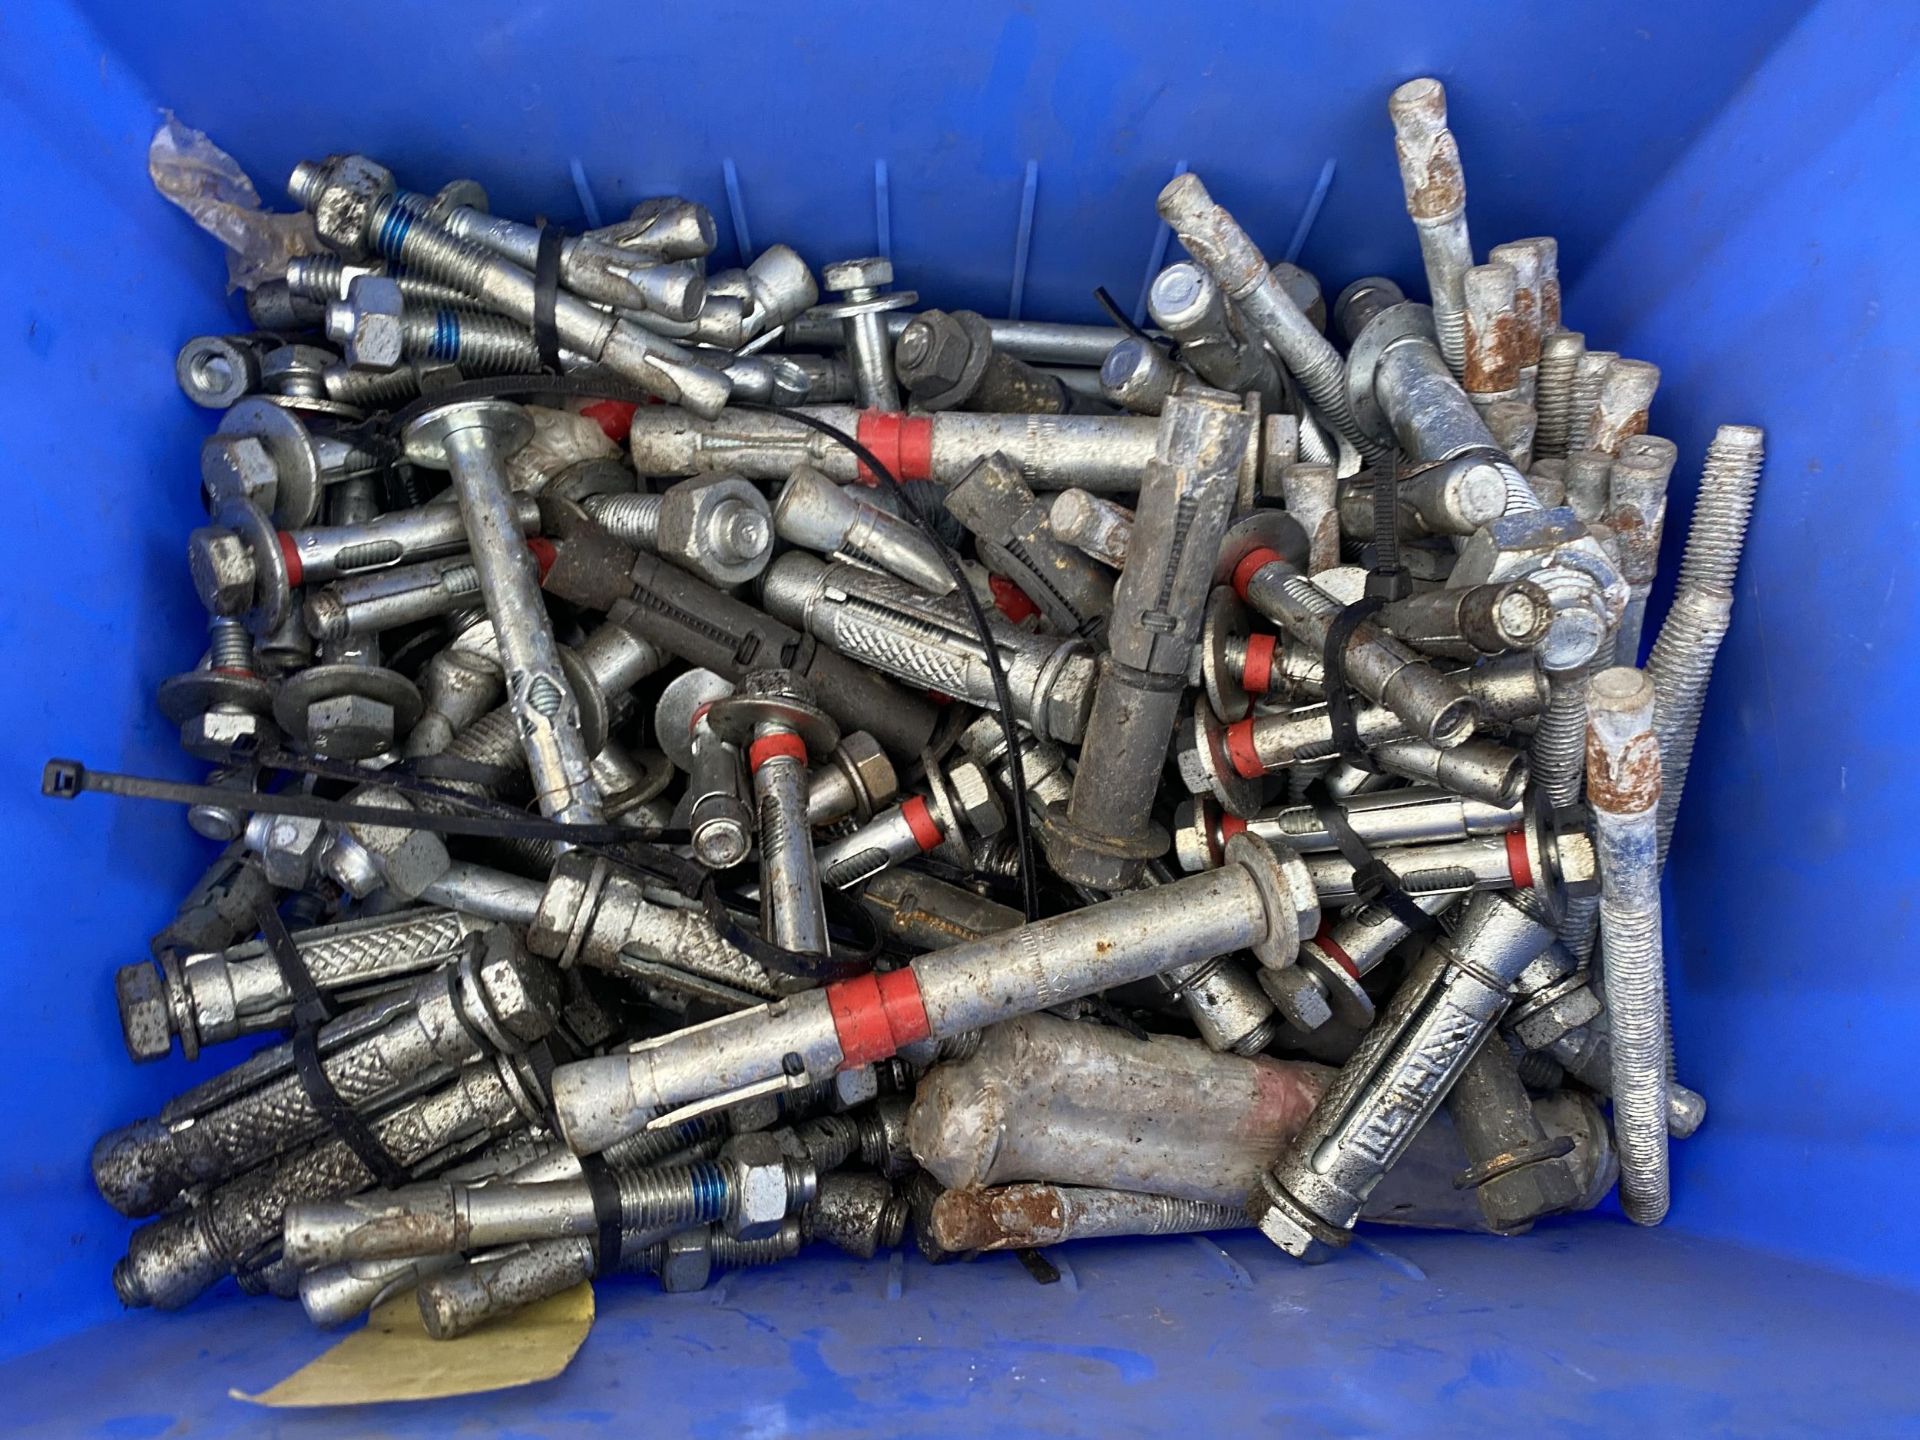 A LARGE ASSORTMENT OF TOOLS AND HARDWARE TO INCLUDE, NUTS AND BOLTS, PLIERS AND RAW BOLTS ETC - Image 2 of 2